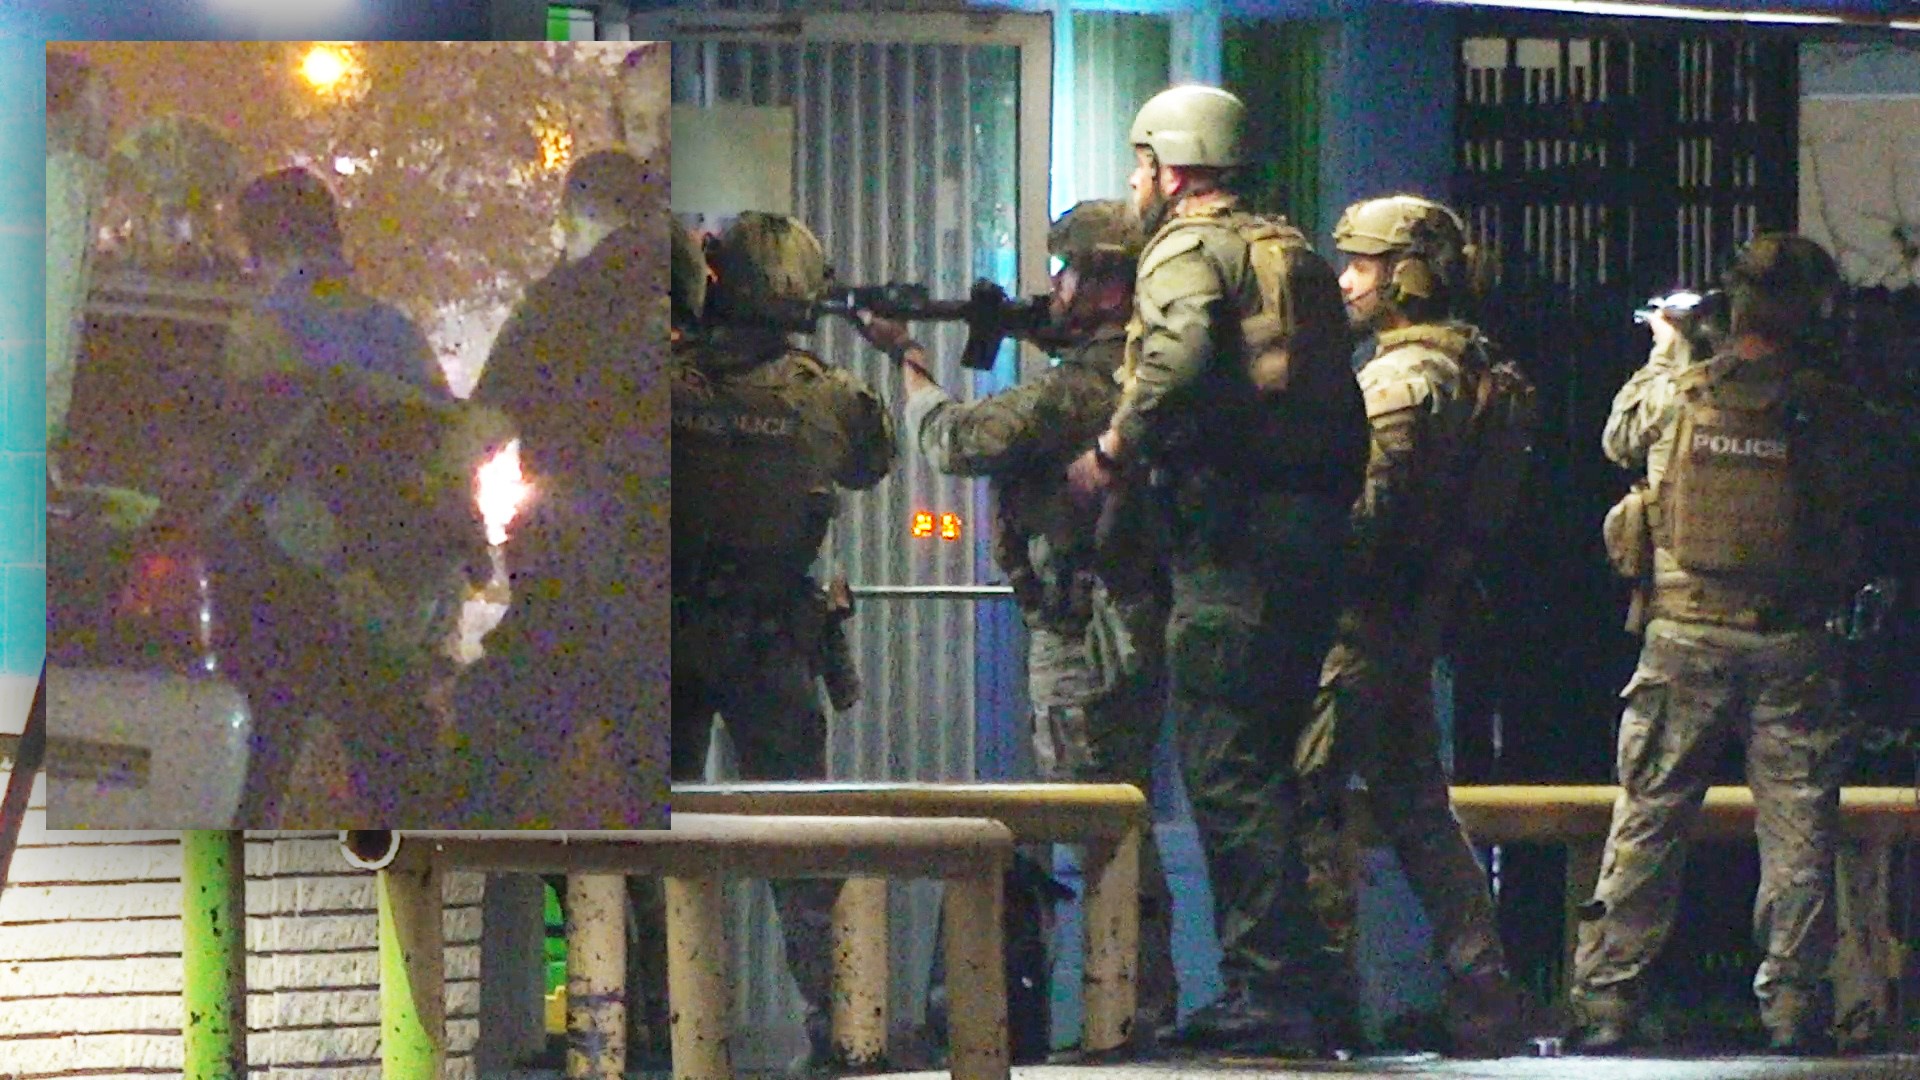 Commander Larry Baimbridge with the Houston Police Department said his SWAT team was called to the scene around 12:30 a.m. in the 1200 block of Federal.